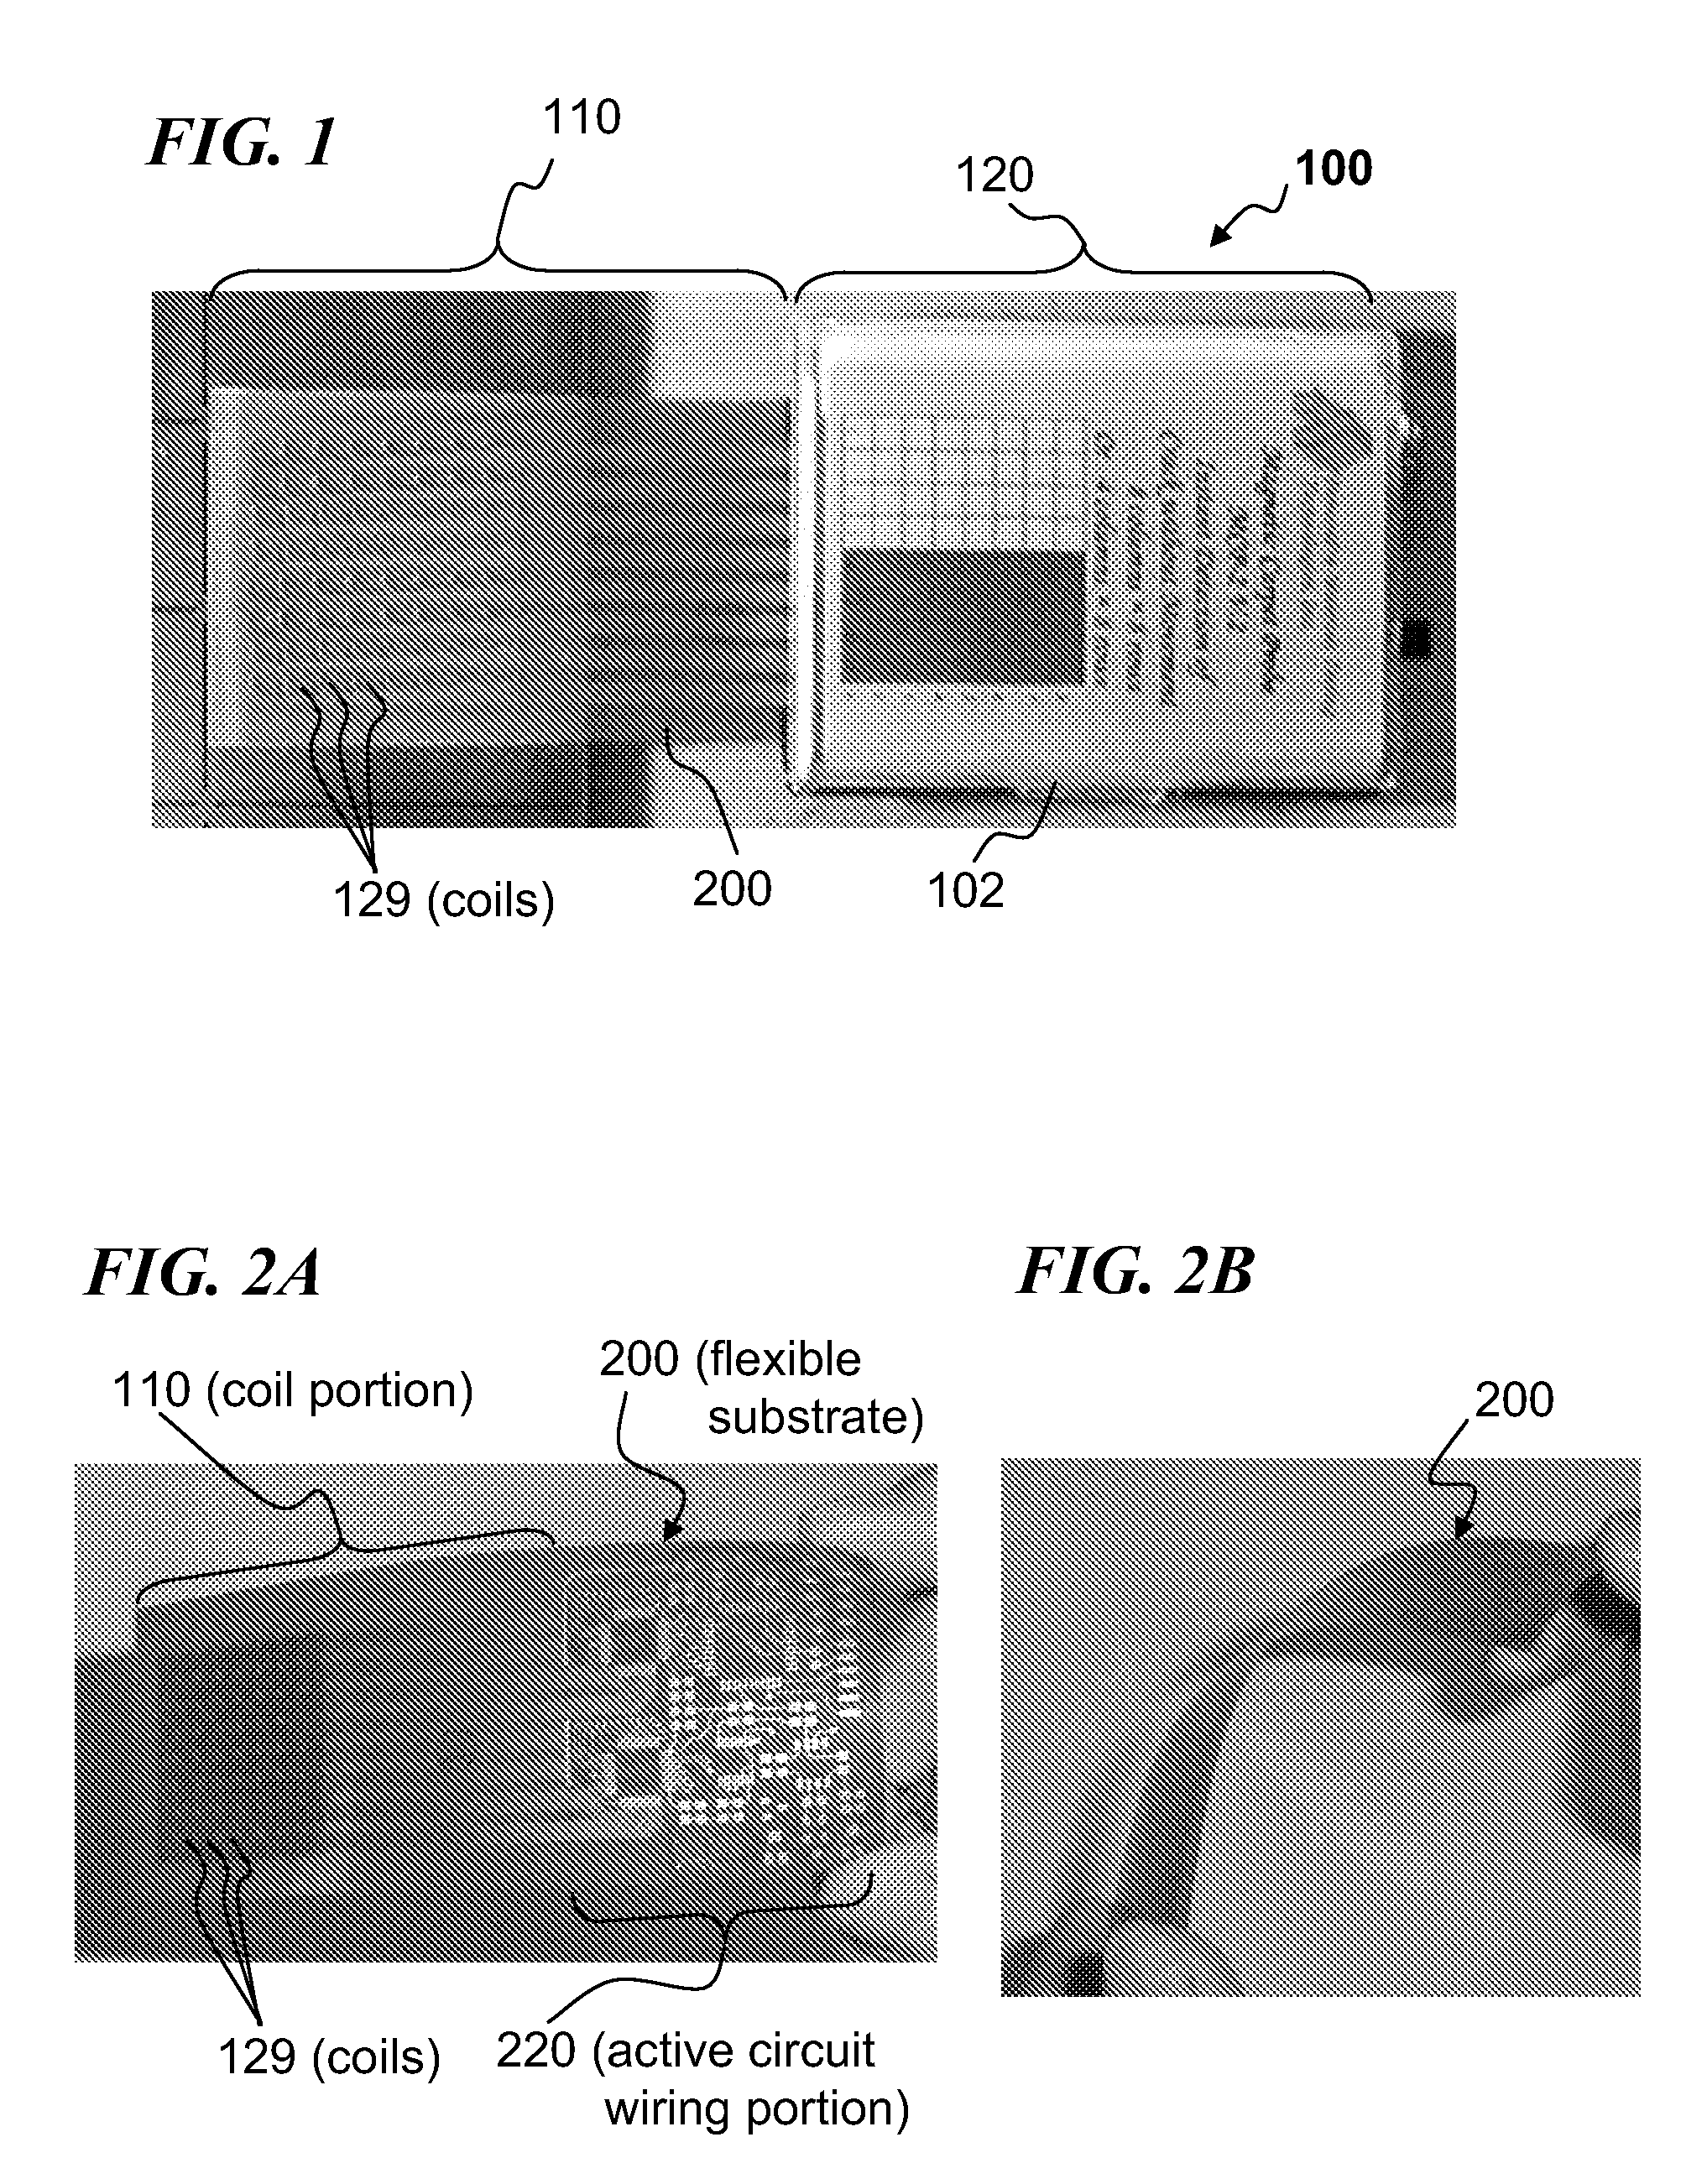 Apparatus and method for eddy-current scanning of a surface to detect cracks and other defects